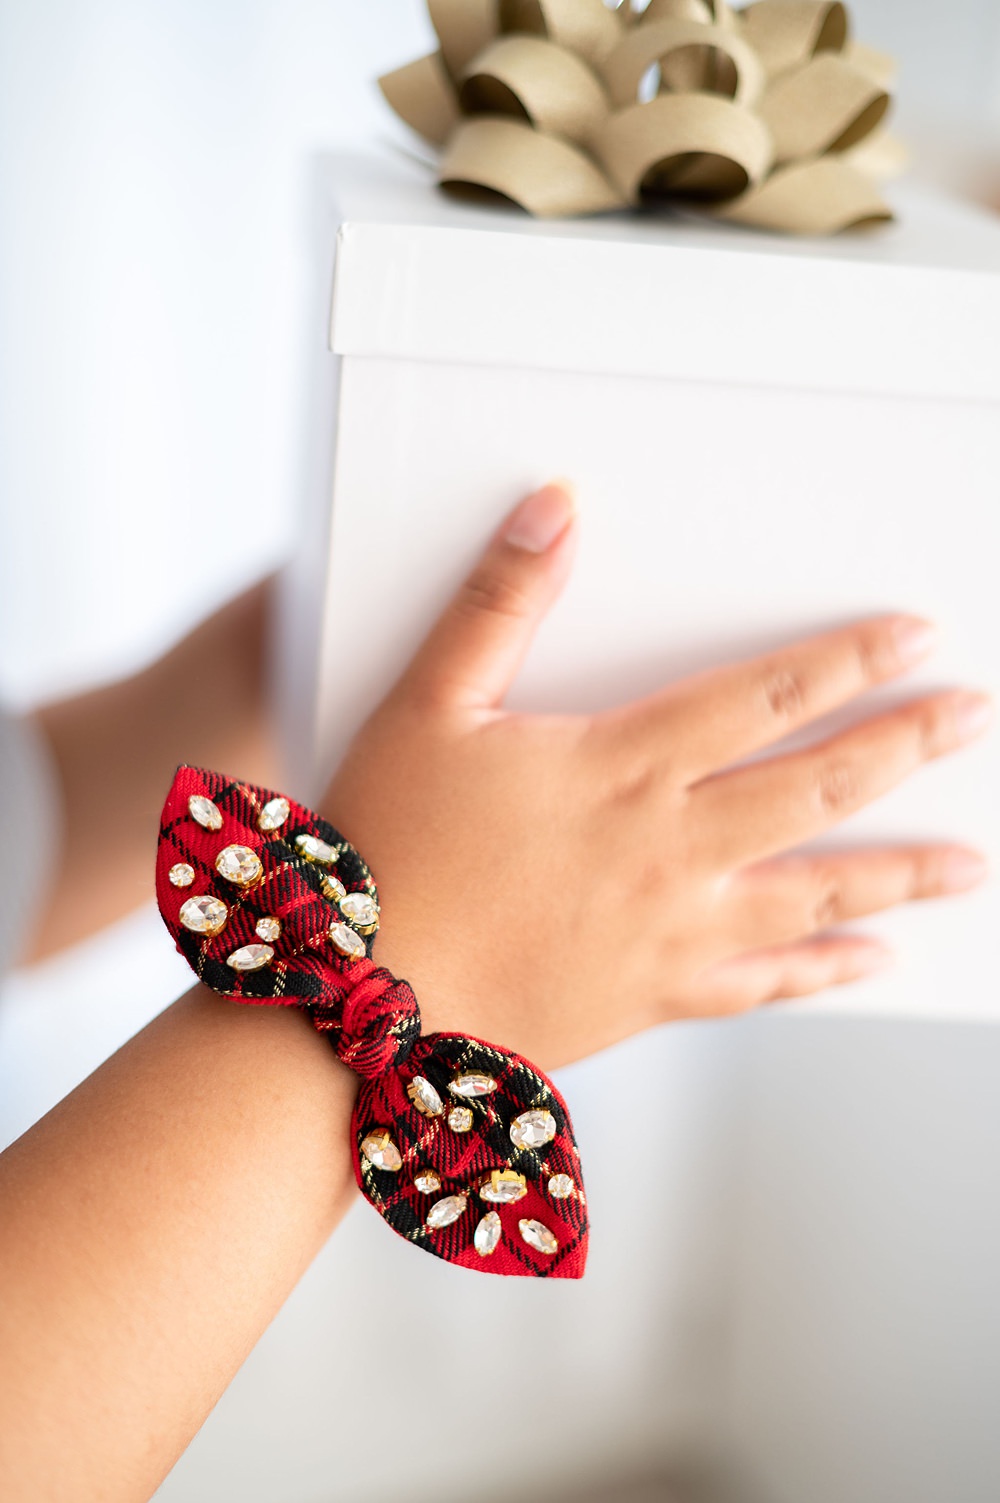 Someone's hand wearing a checkered red ribbon while holding a while gift box.